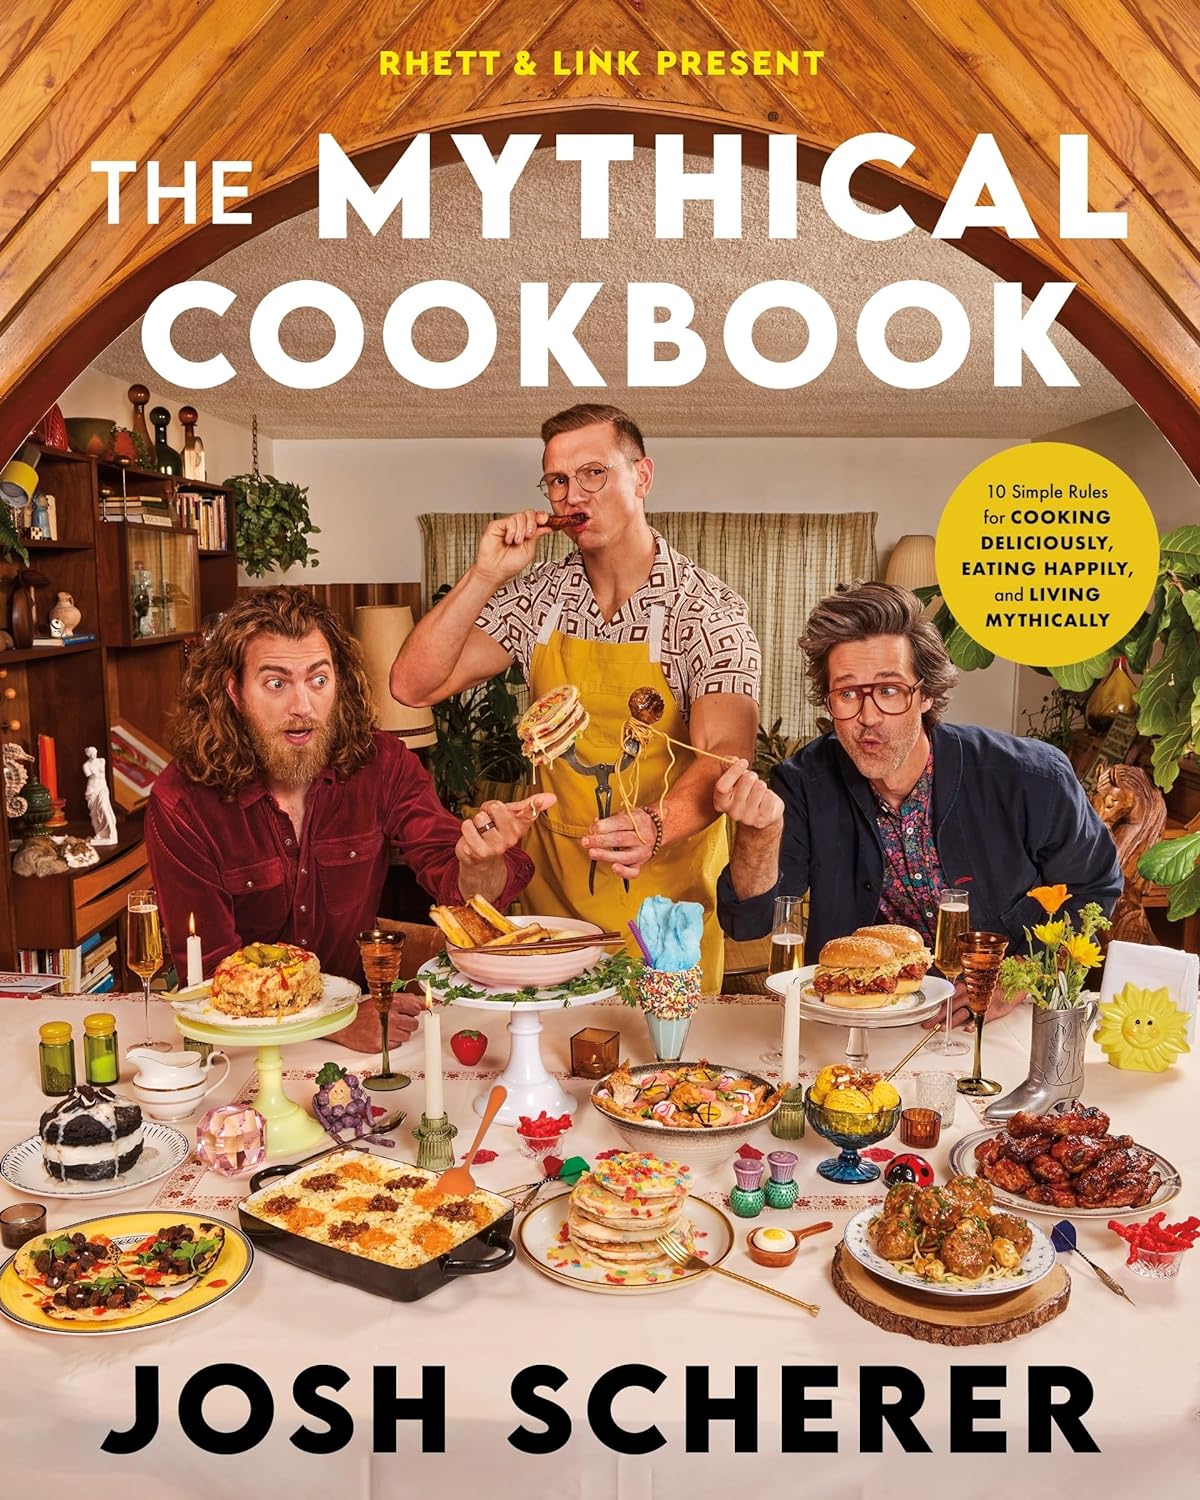 The Mythical Cookbook: 10 Simple Rules for Cooking Deliciously, Eating Happily, and Living Mythically by Josh Scherer